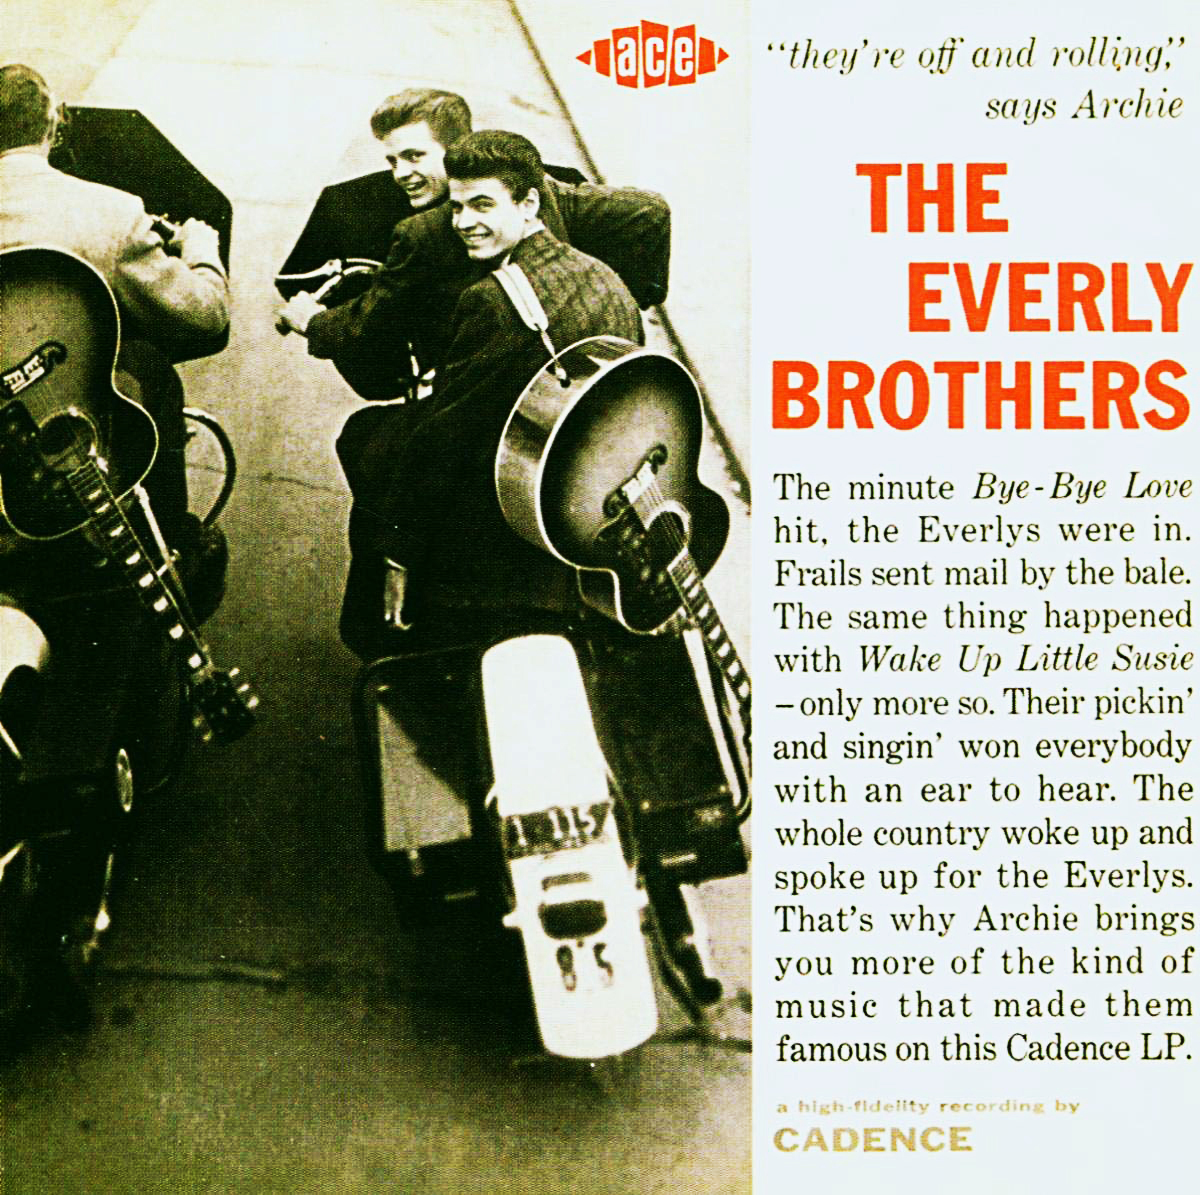 “Bye Bye Love” - The Everly Brothers 1957